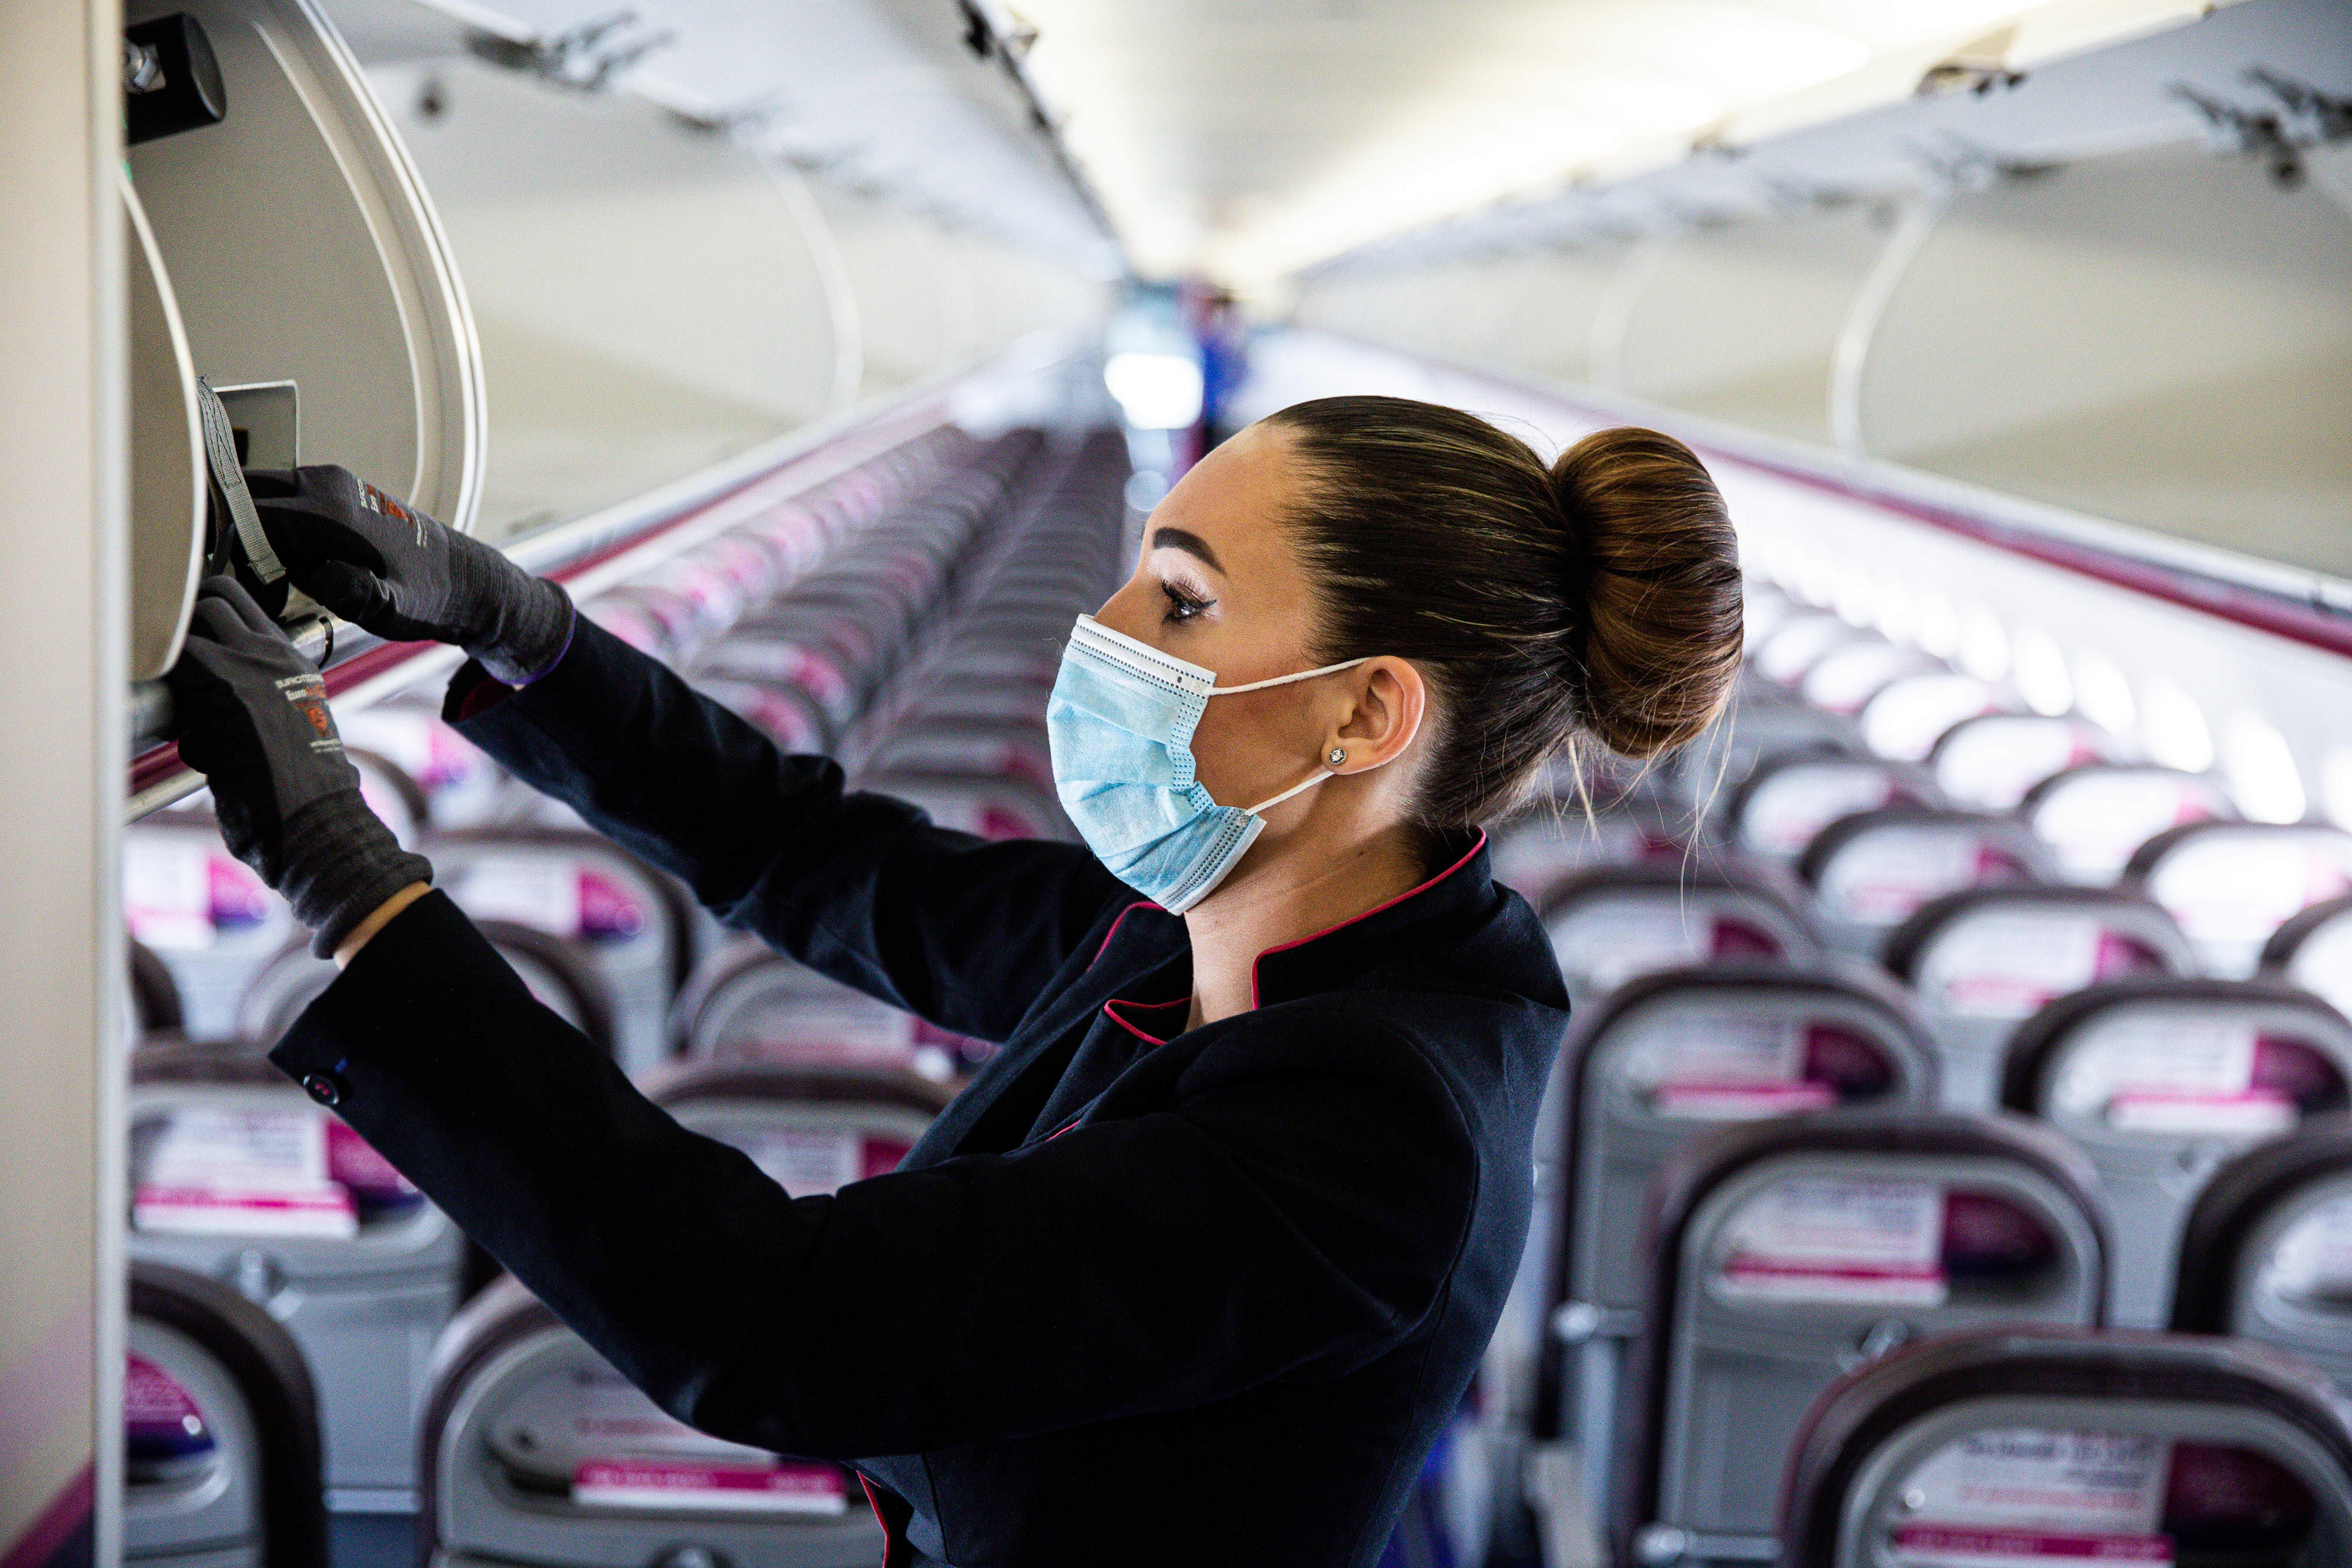 KnowESG_Wizz Air Cuts Carbon Intensity by 11-